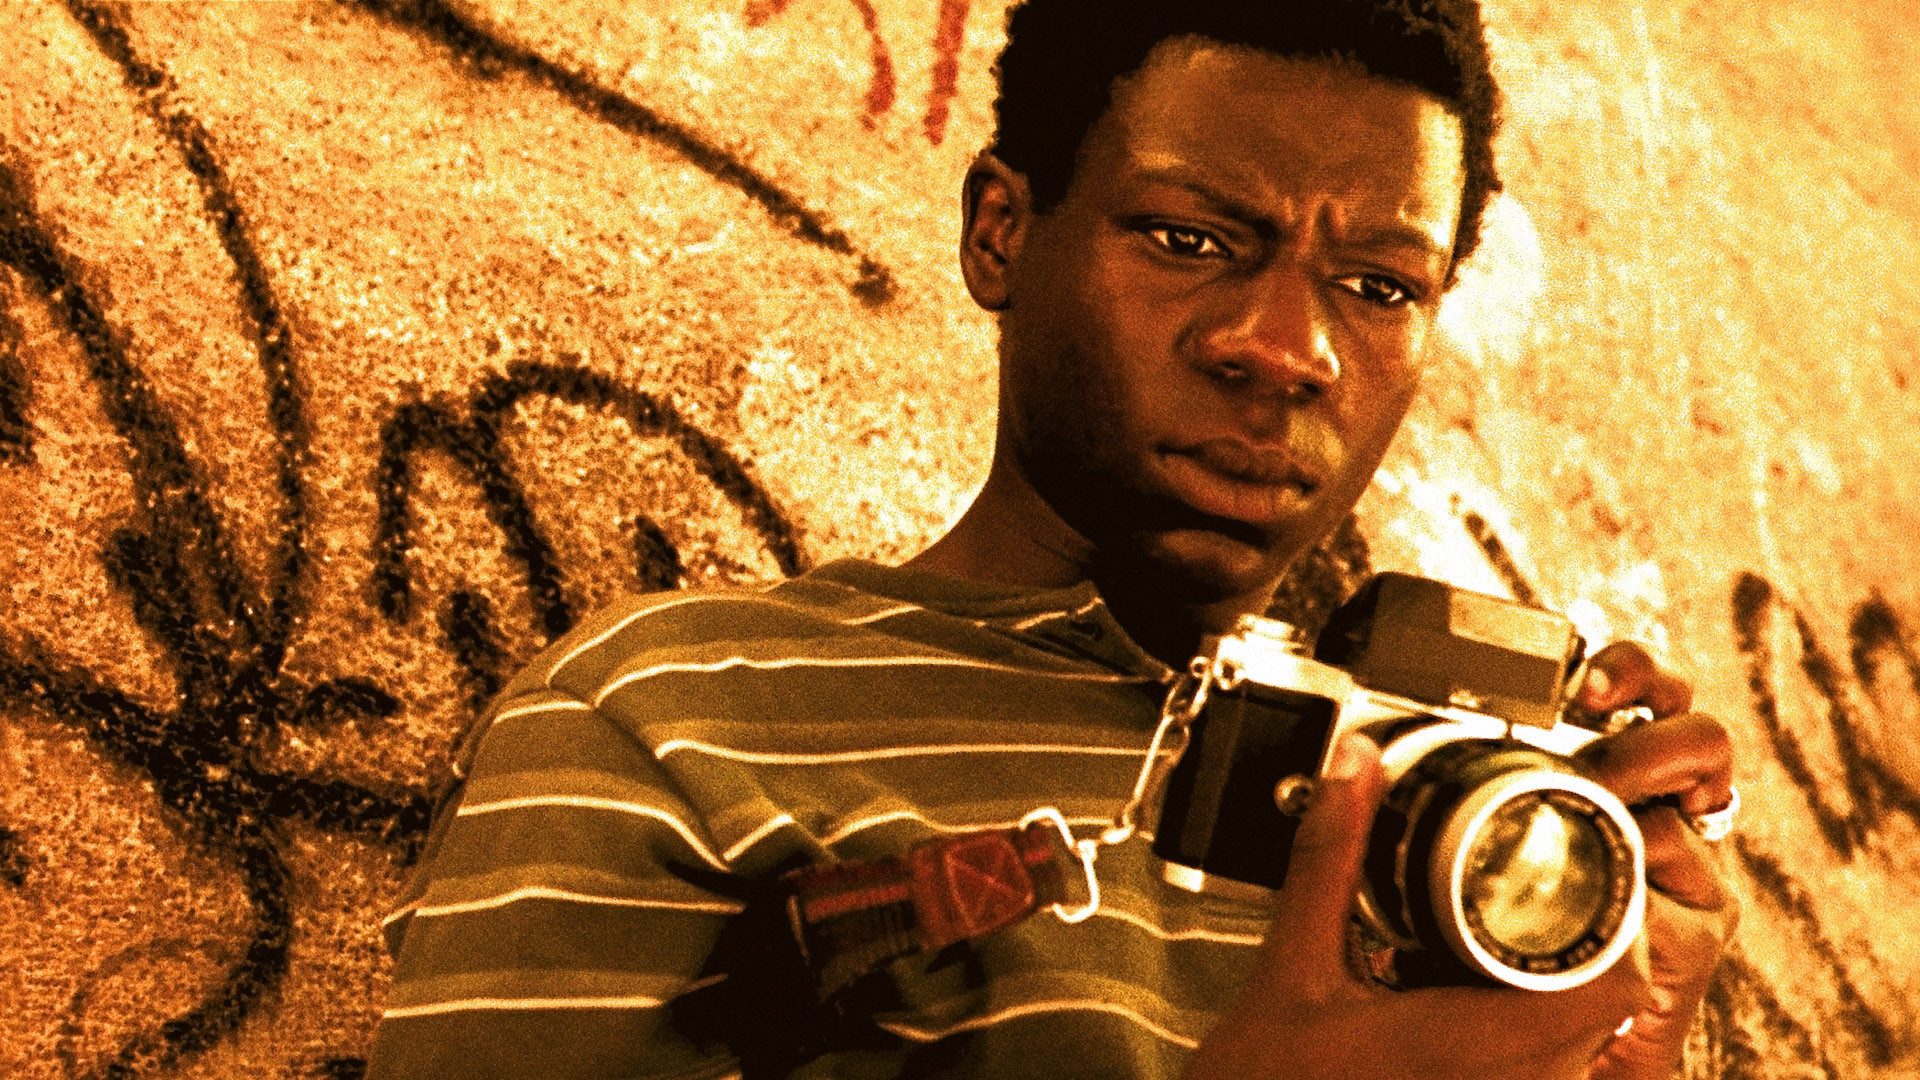 'City of God 10 Years Later' and Four Other MustSee